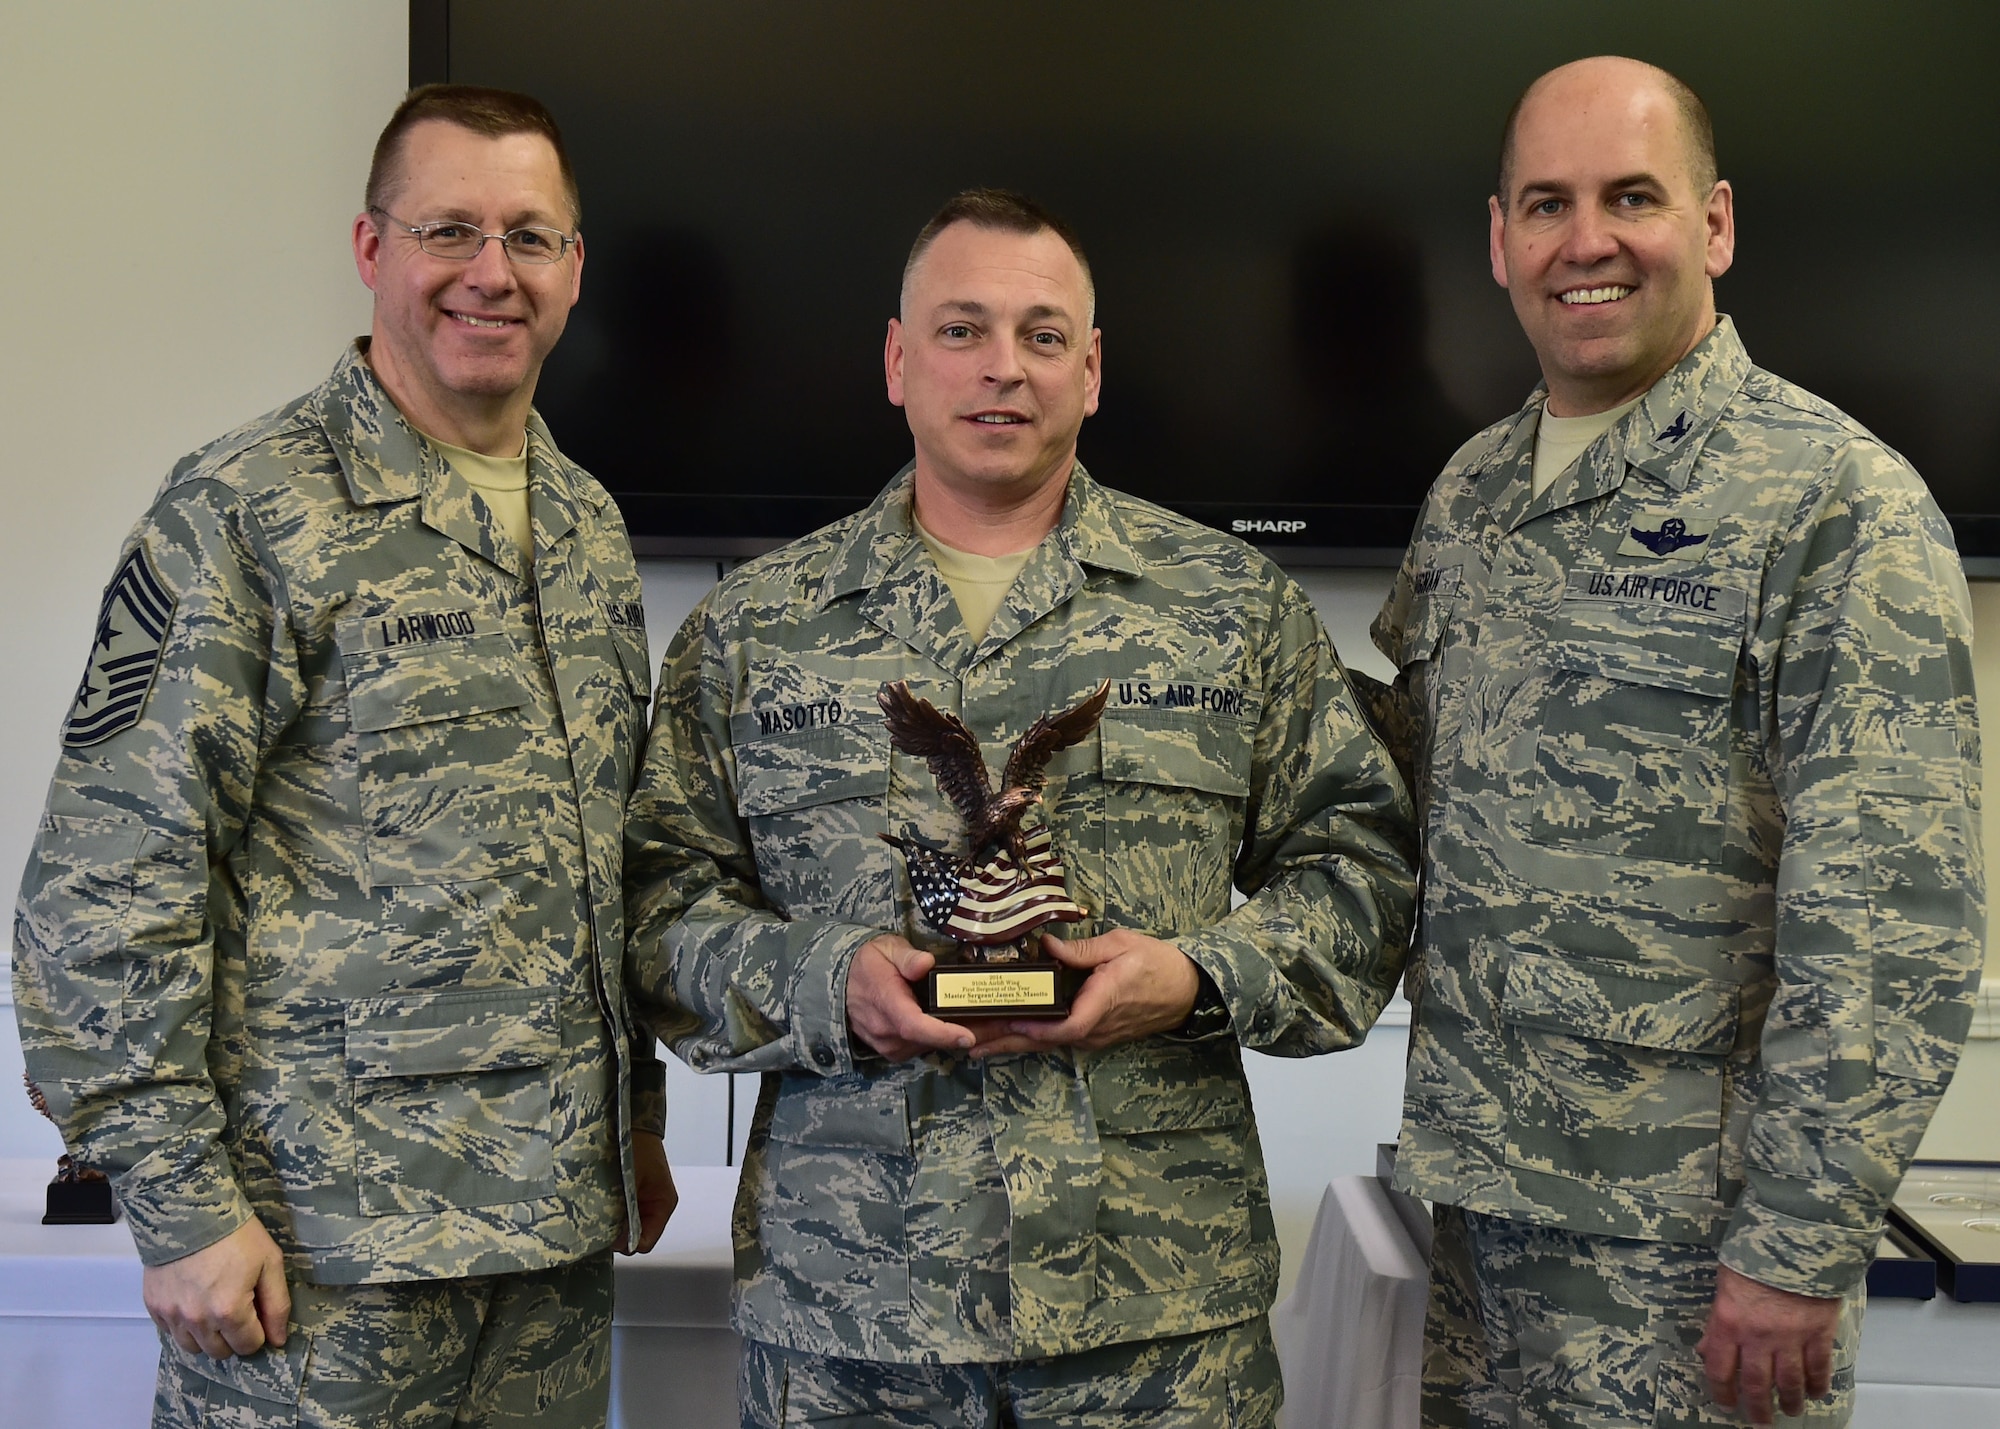 910th Airlift Wing 2014 First Sergeant of the Year, Master Sgt. James Masotto, poses with 910th Airlift Wing Command Chief Master Sgt. Steven Larwood and 910th Airlift Wing Commander Col. James Dignan, after receiving his award at a ceremony April 12. Masotto is the first sergeant of the 76th Aerial Port Squadron here. (U.S. Air Force photo/Senior Airman Rachel Kocin)